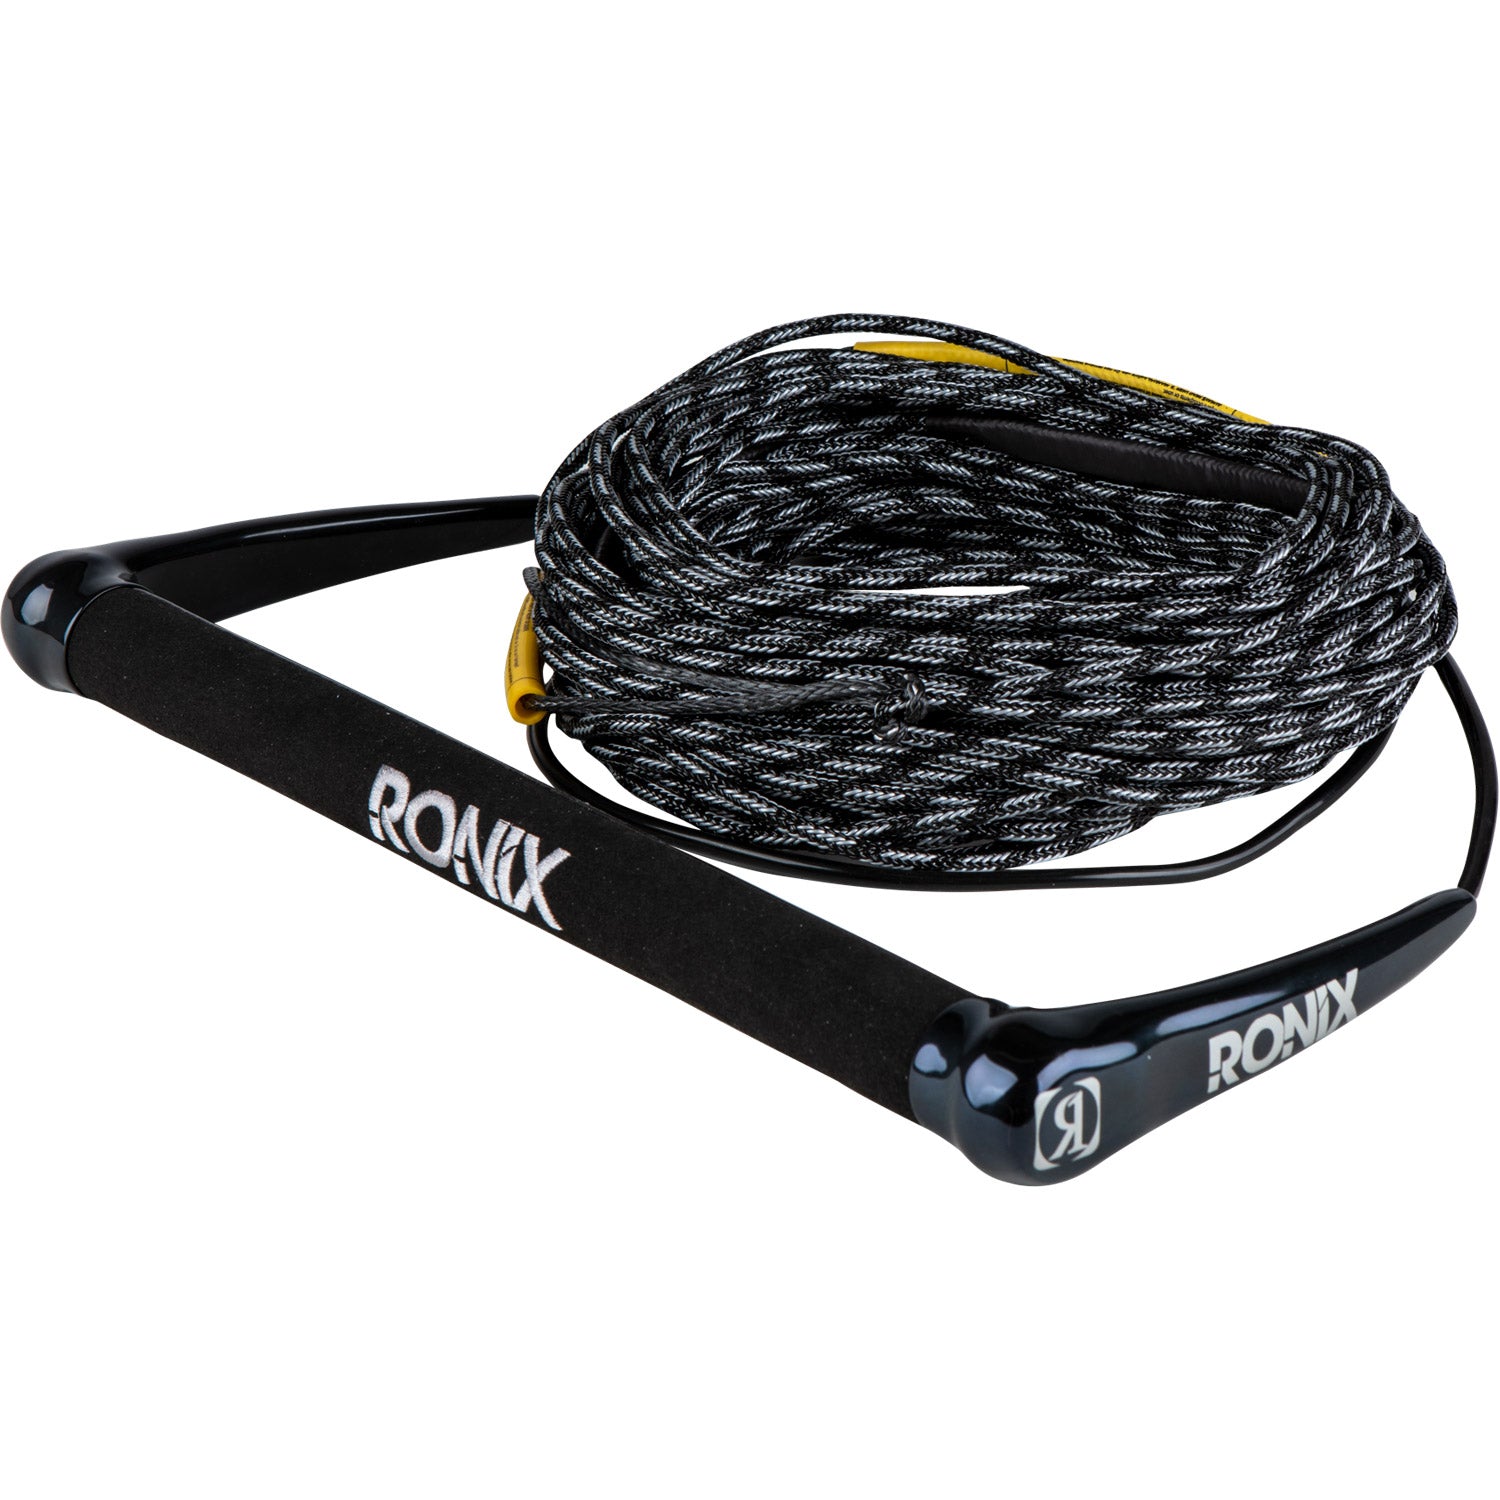 Combo 4.0 Wakeboard Rope Package